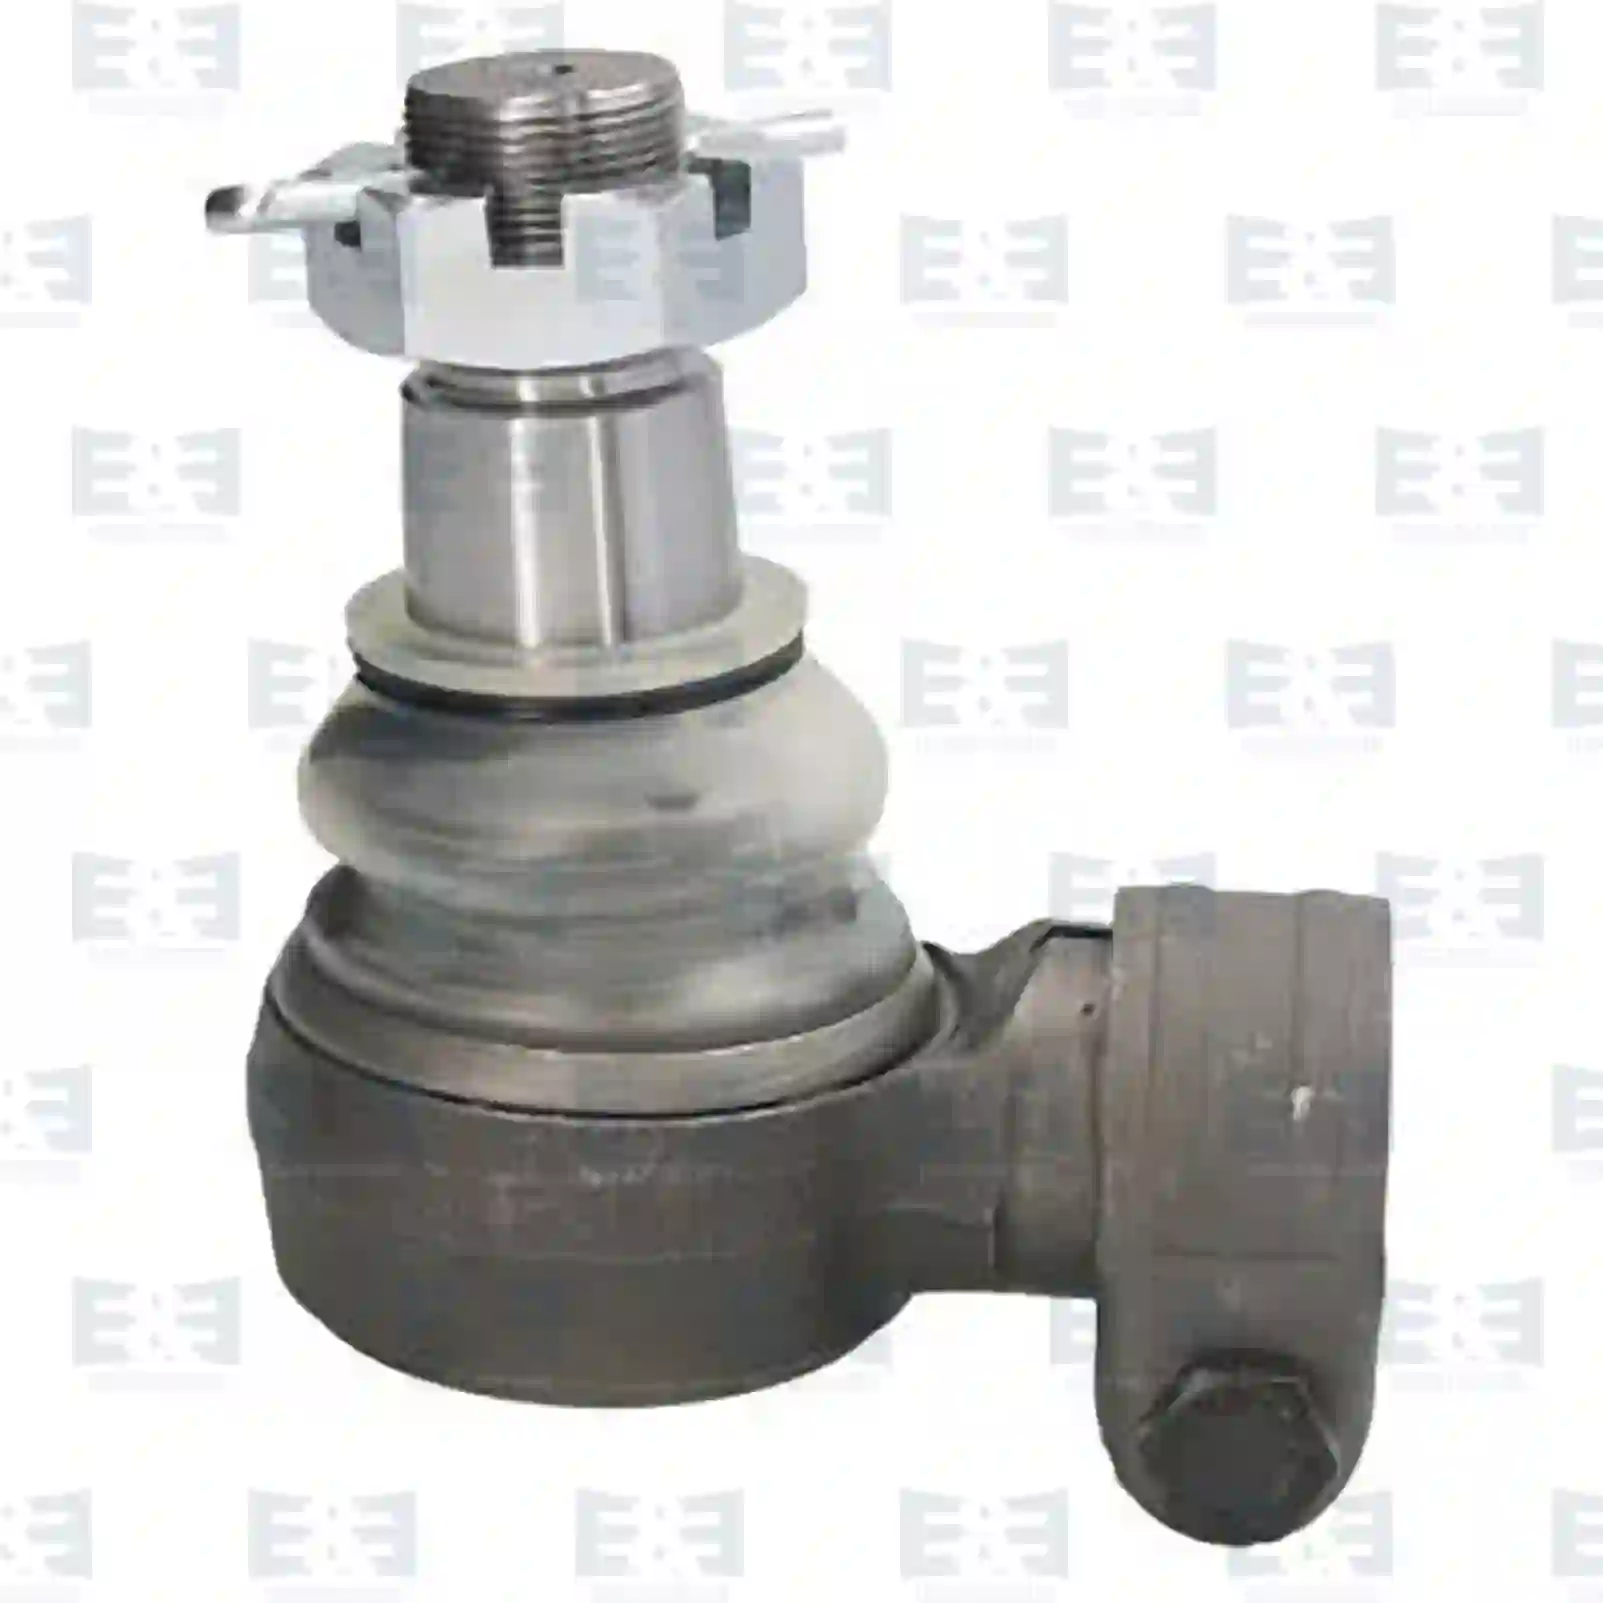 Steering Cylinder Ball joint, right hand thread, EE No 2E2205794 ,  oem no:00166467, 98166467, 1212146, 1271125, 4143415, 7364001574, 42530316, 42538047, 93157156, 98166467, 81953016232, 011019986, 5001823718, 281953016232, 7364001574, 3090292, 3099129, ZG40407-0008 E&E Truck Spare Parts | Truck Spare Parts, Auotomotive Spare Parts